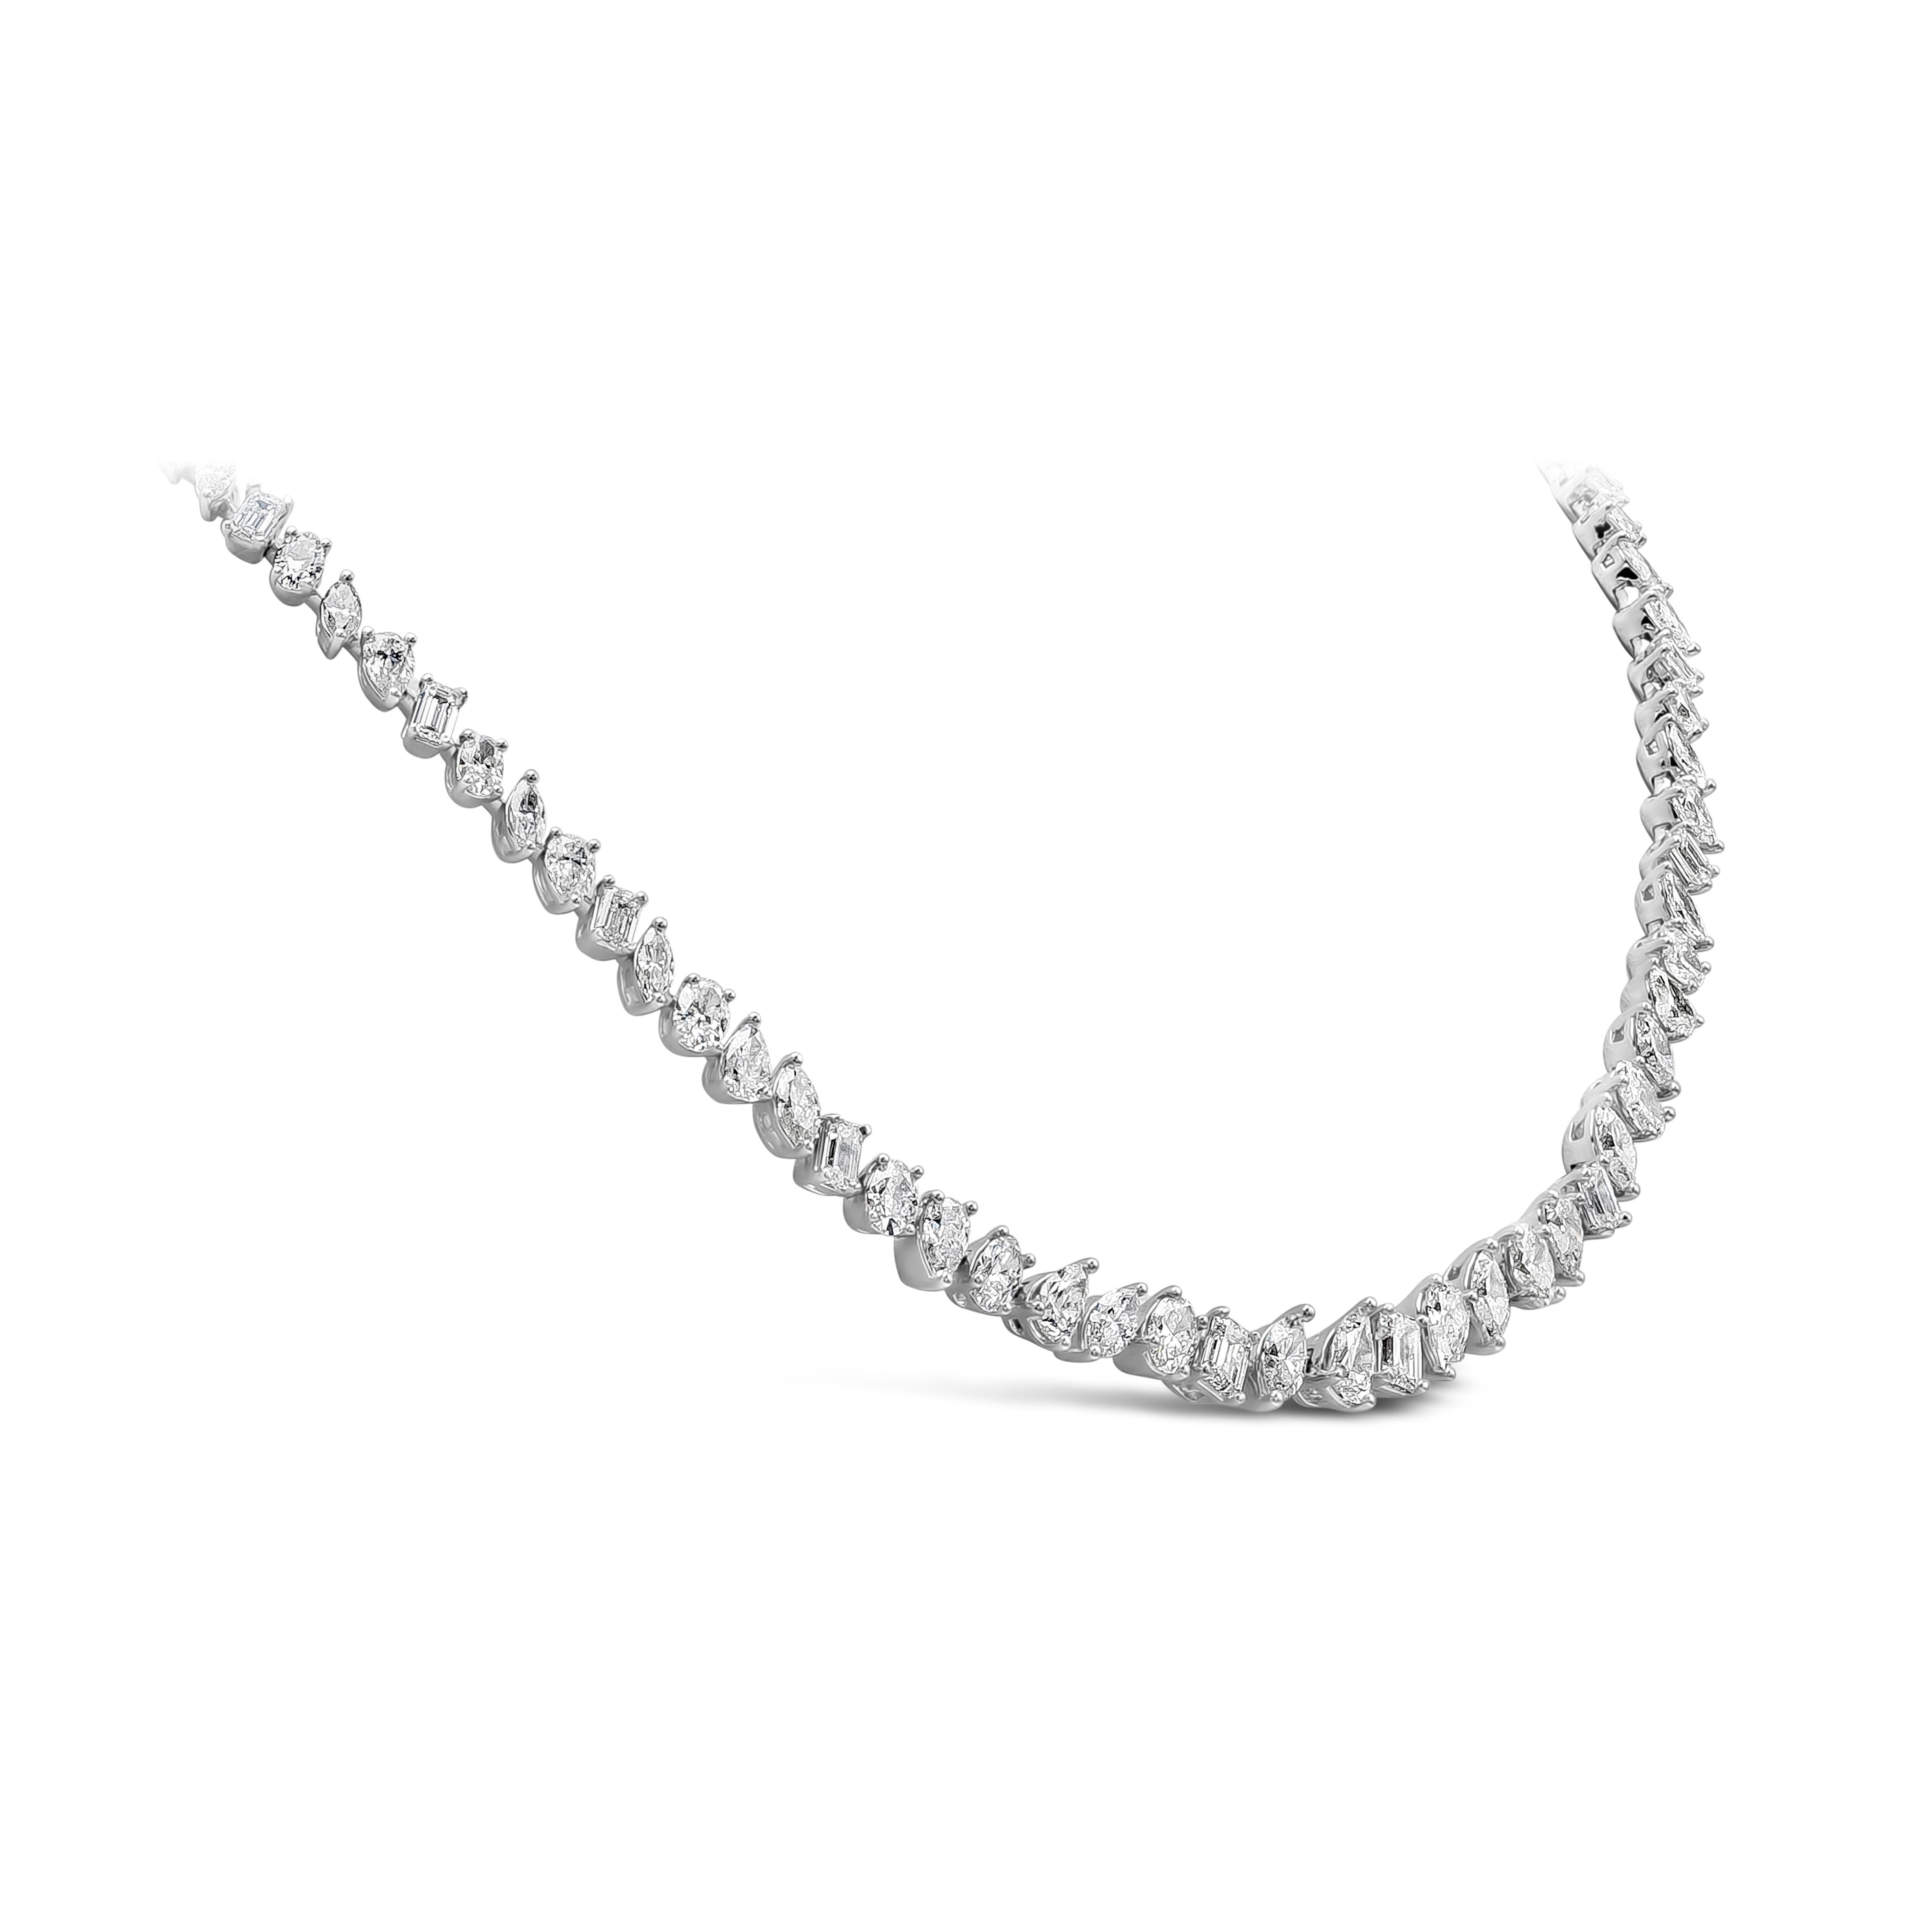 A riviera design necklace showcasing a row of fancy shape mixed cut diamonds graduating in size, set in an intricately-designed 18K white gold mounting. Diamonds weigh 19.38 carats total and are approximately G-H color, VS-SI in clarity. 16.63